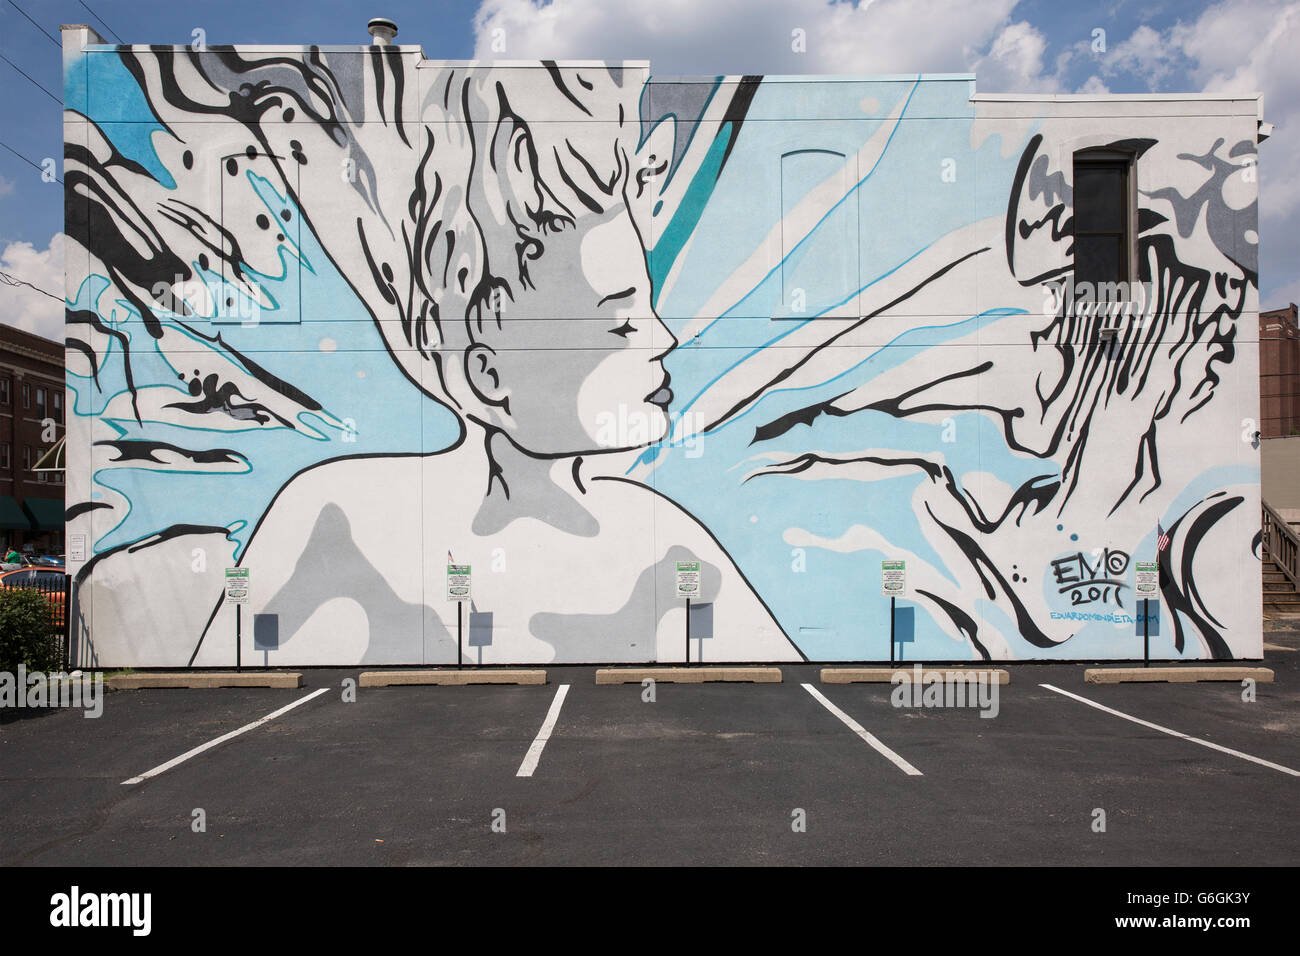 Public wall mural depicting a woman, Indianapolis Indiana. Stock Photo